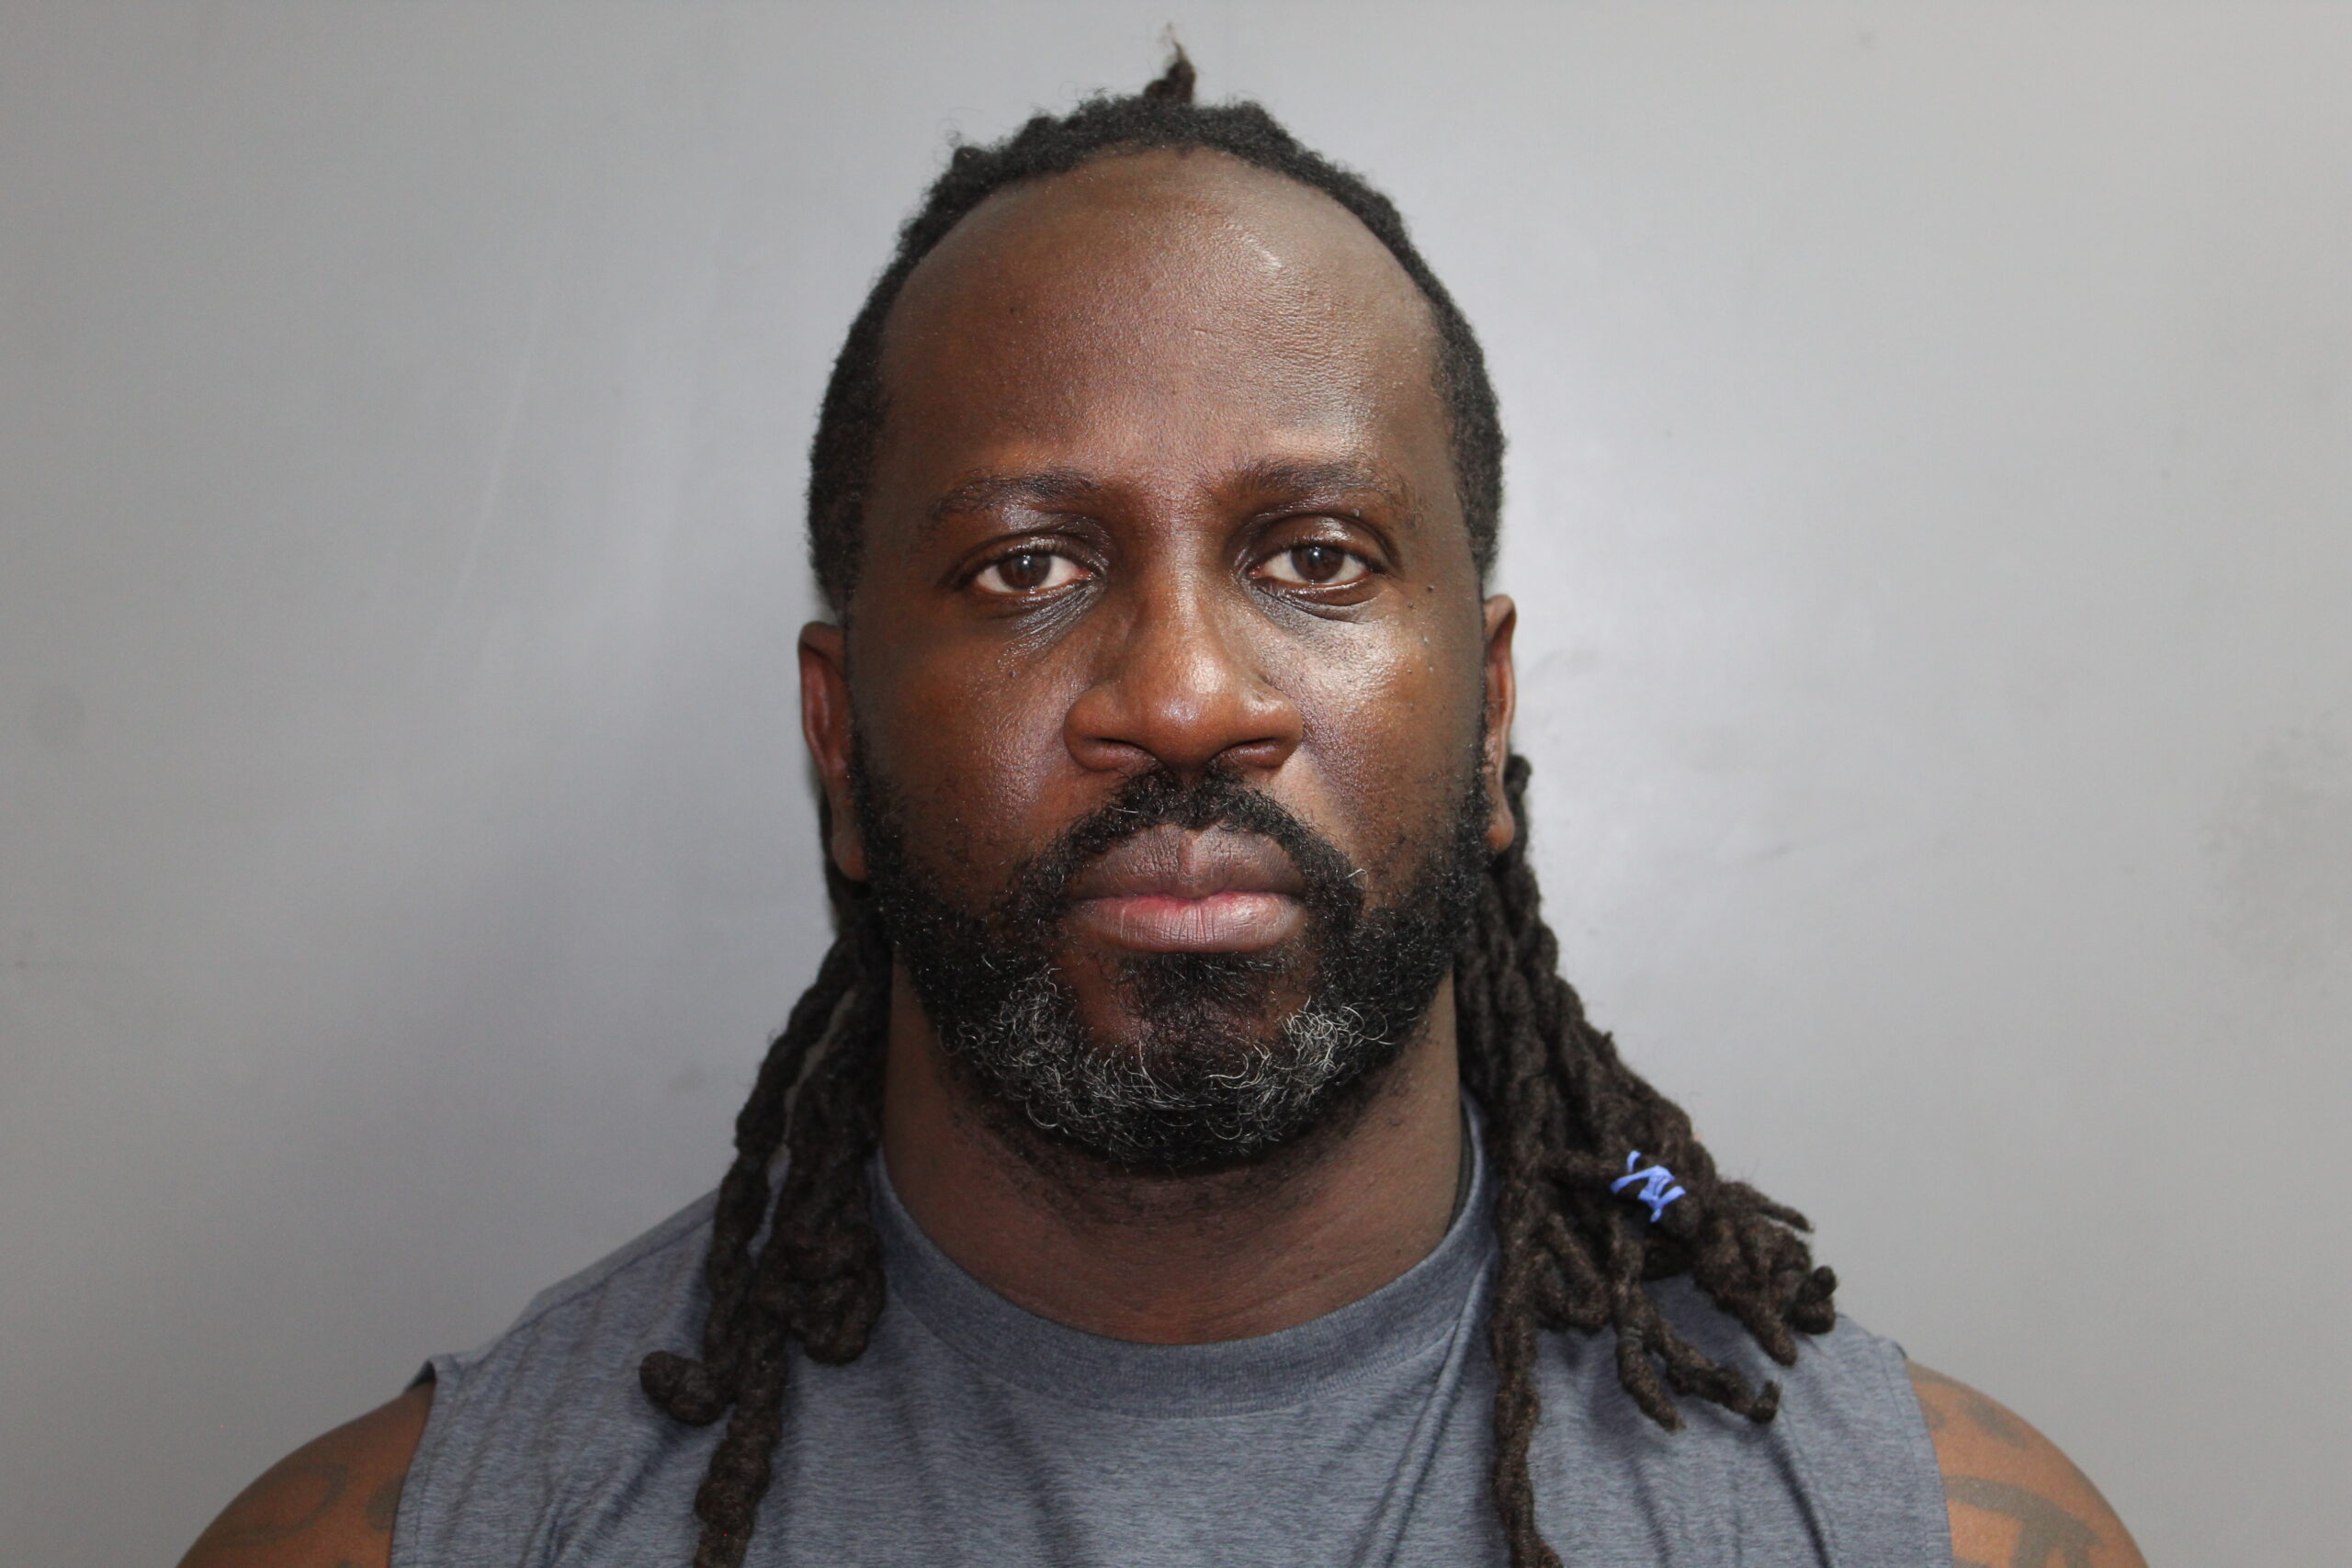 Barren Spot Man Cashed Stimulus Check Twice, 1st Using A Phone App, Sent From Florida To Face Charges In St. Croix: VIPD